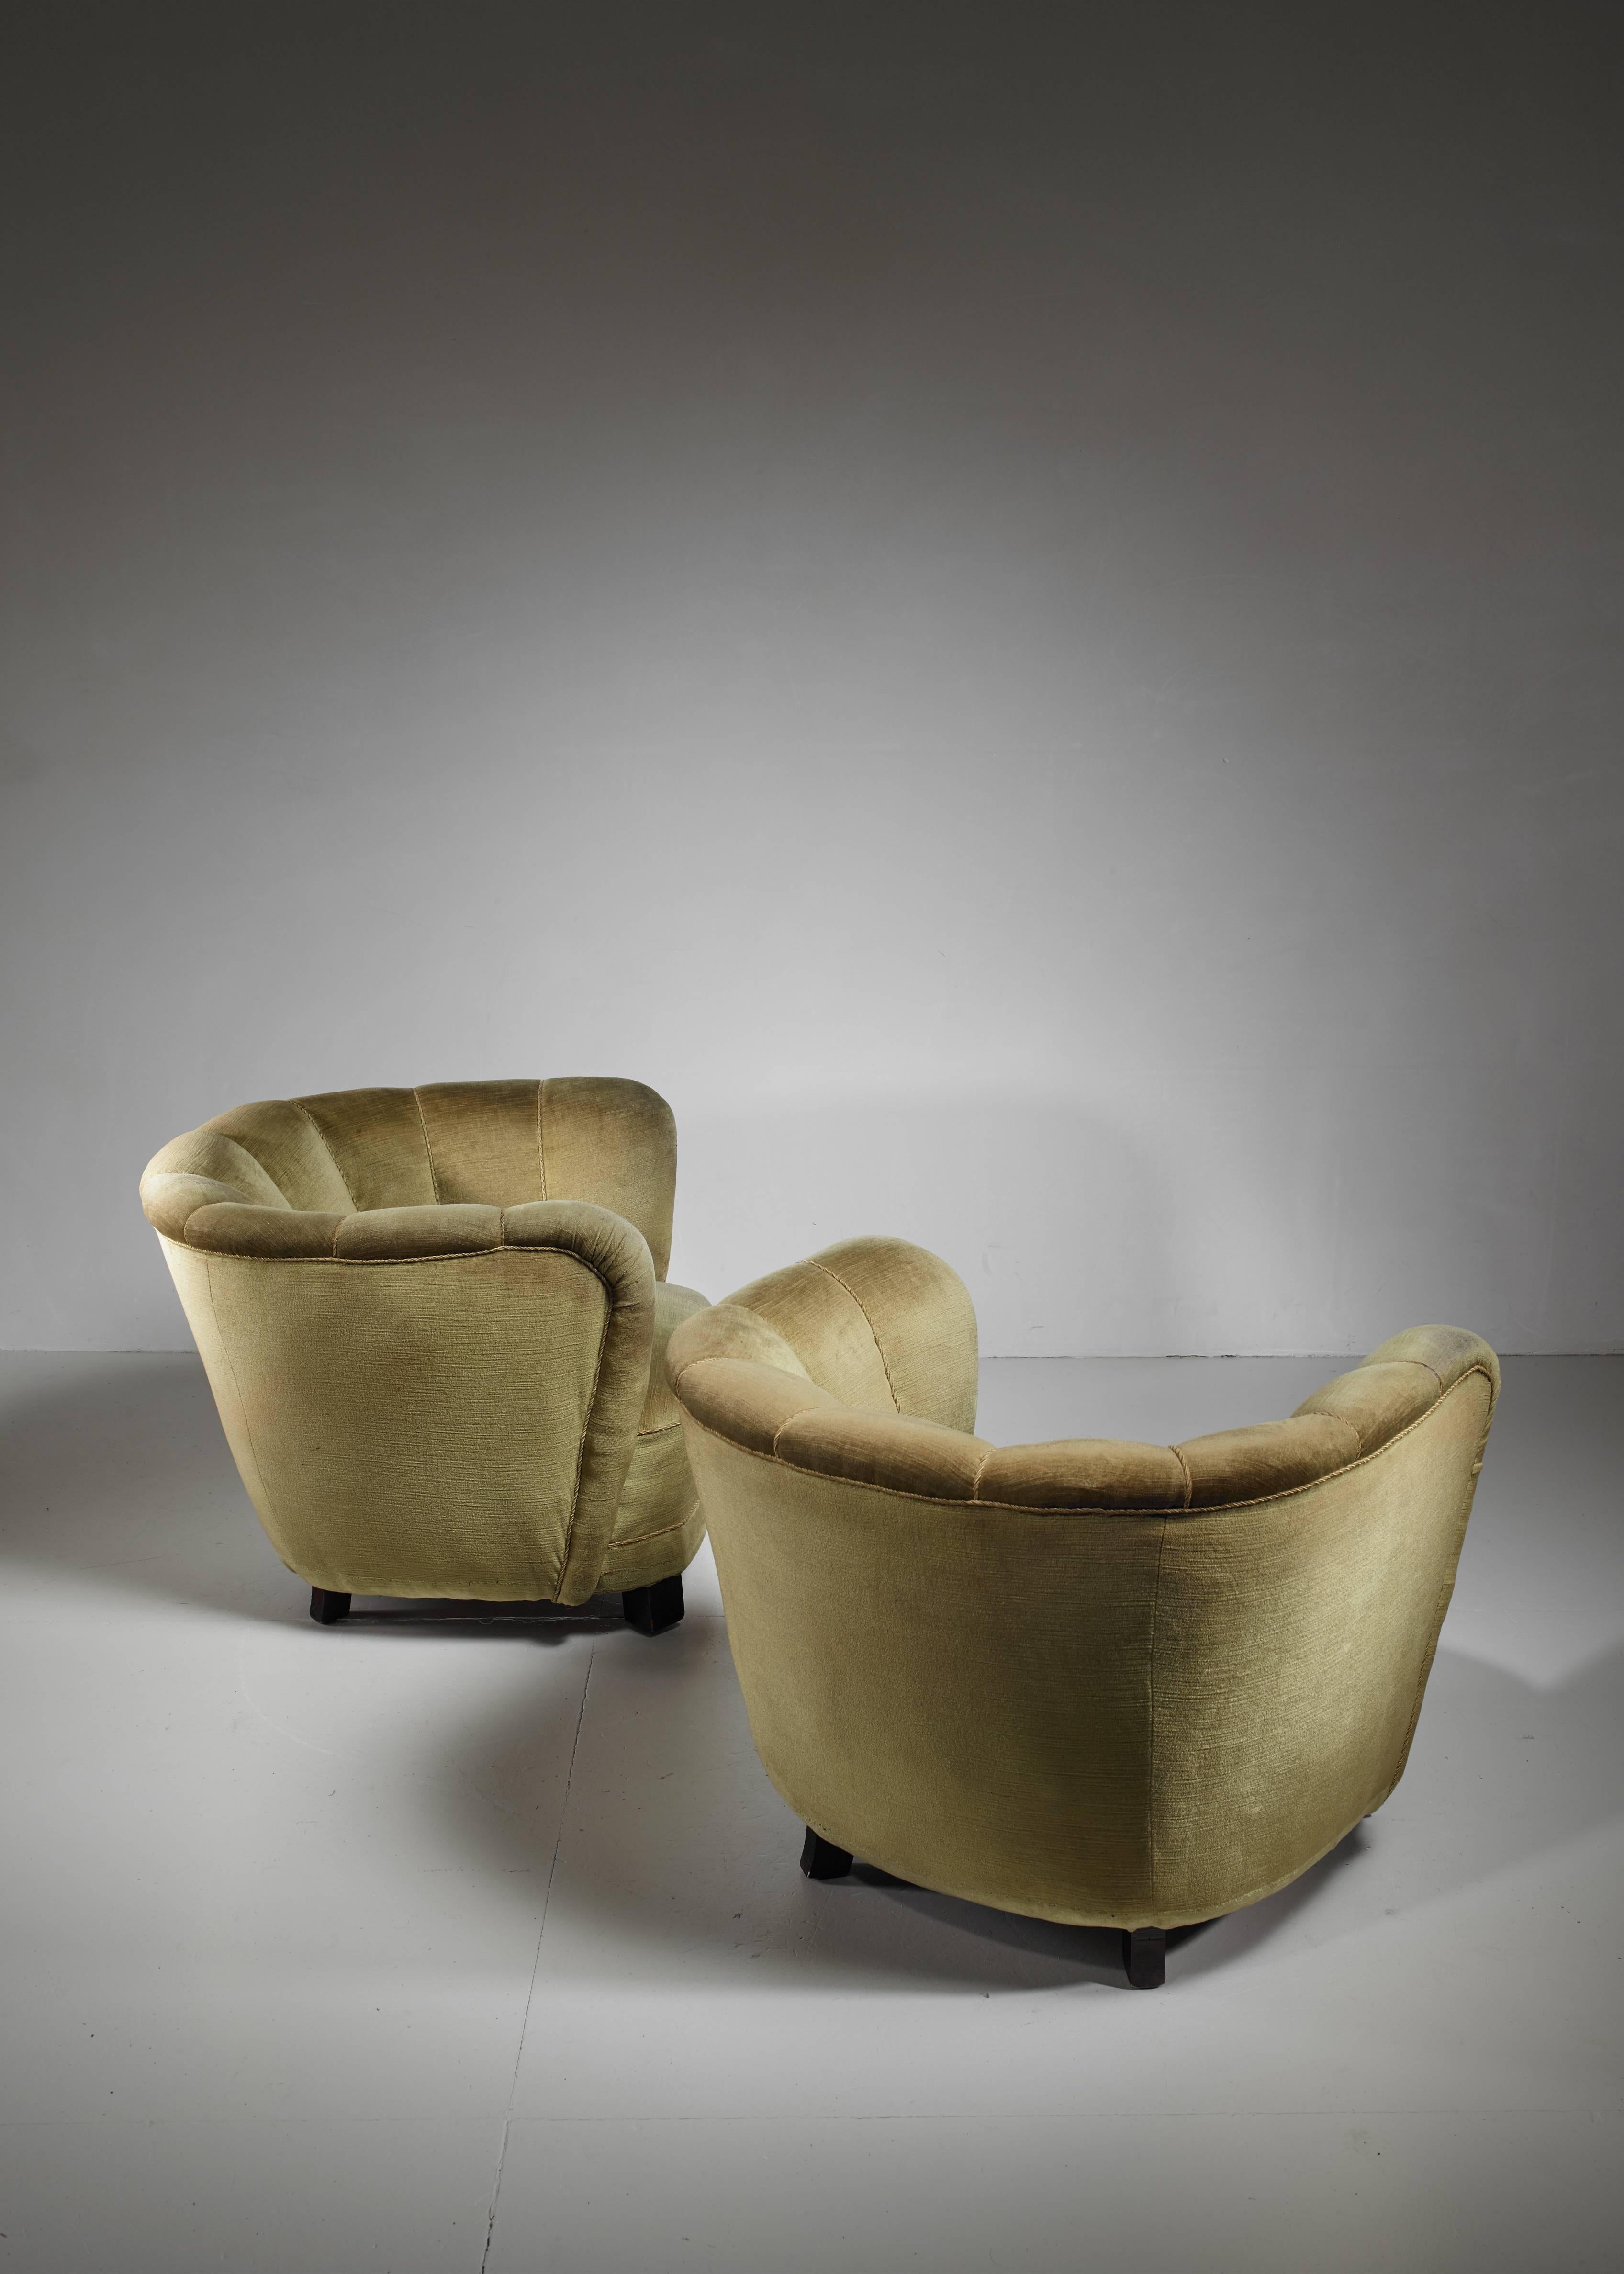 Scandinavian Modern Pair of Club Chairs with Green Velour Upholstery, Denmark, 1940s For Sale